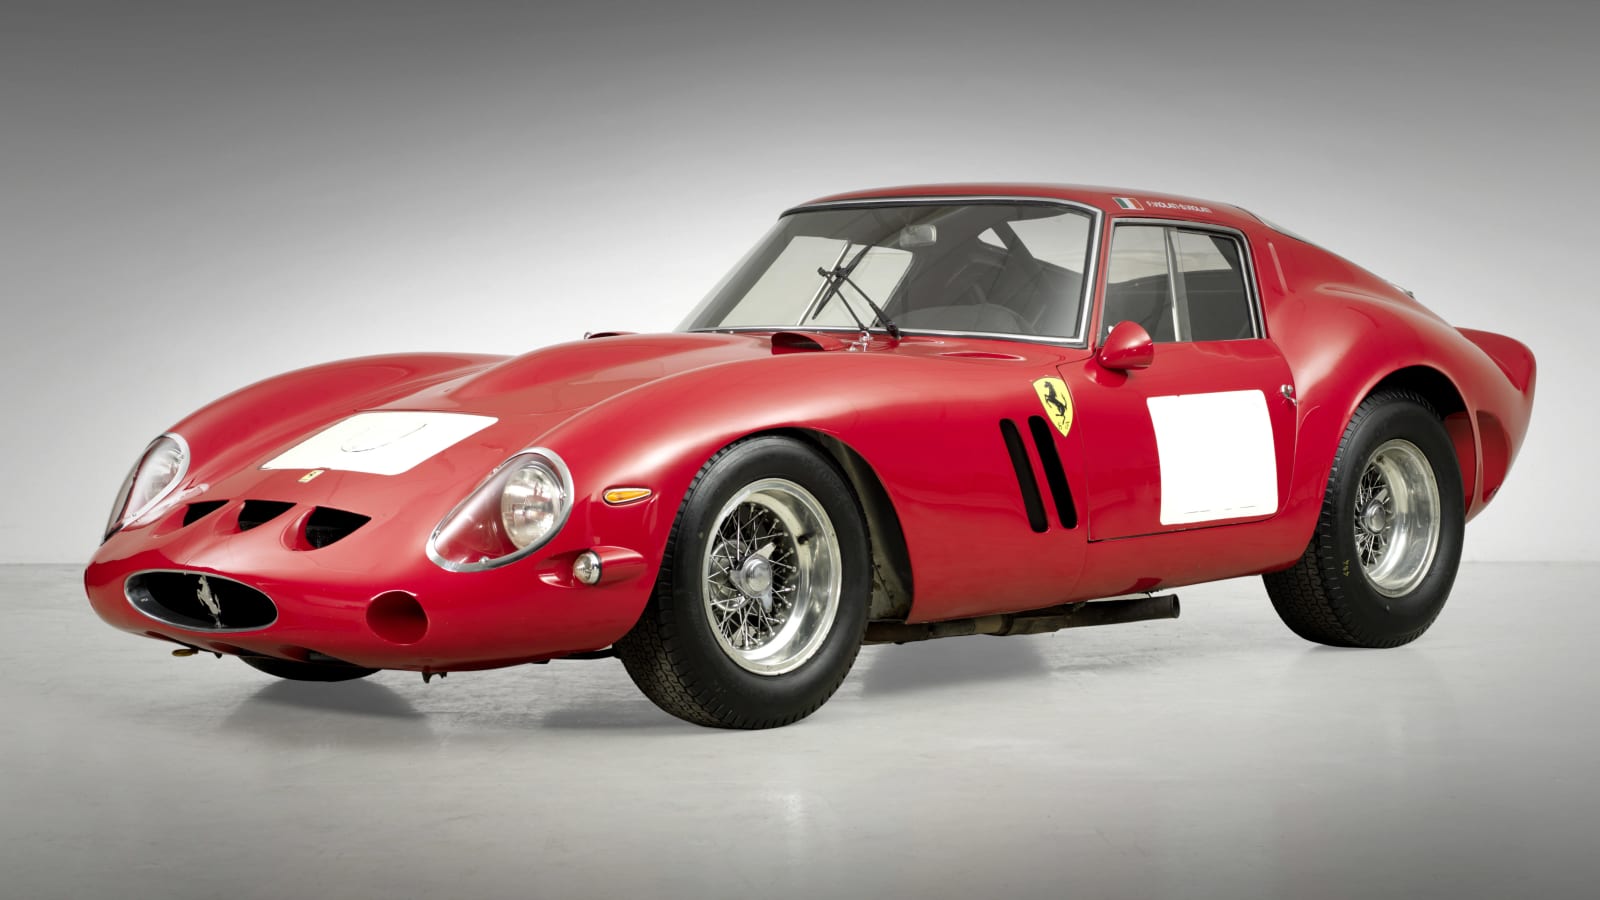 Ferrari 250 GTO Off-Road Rendering Is Epic Yet Controversial